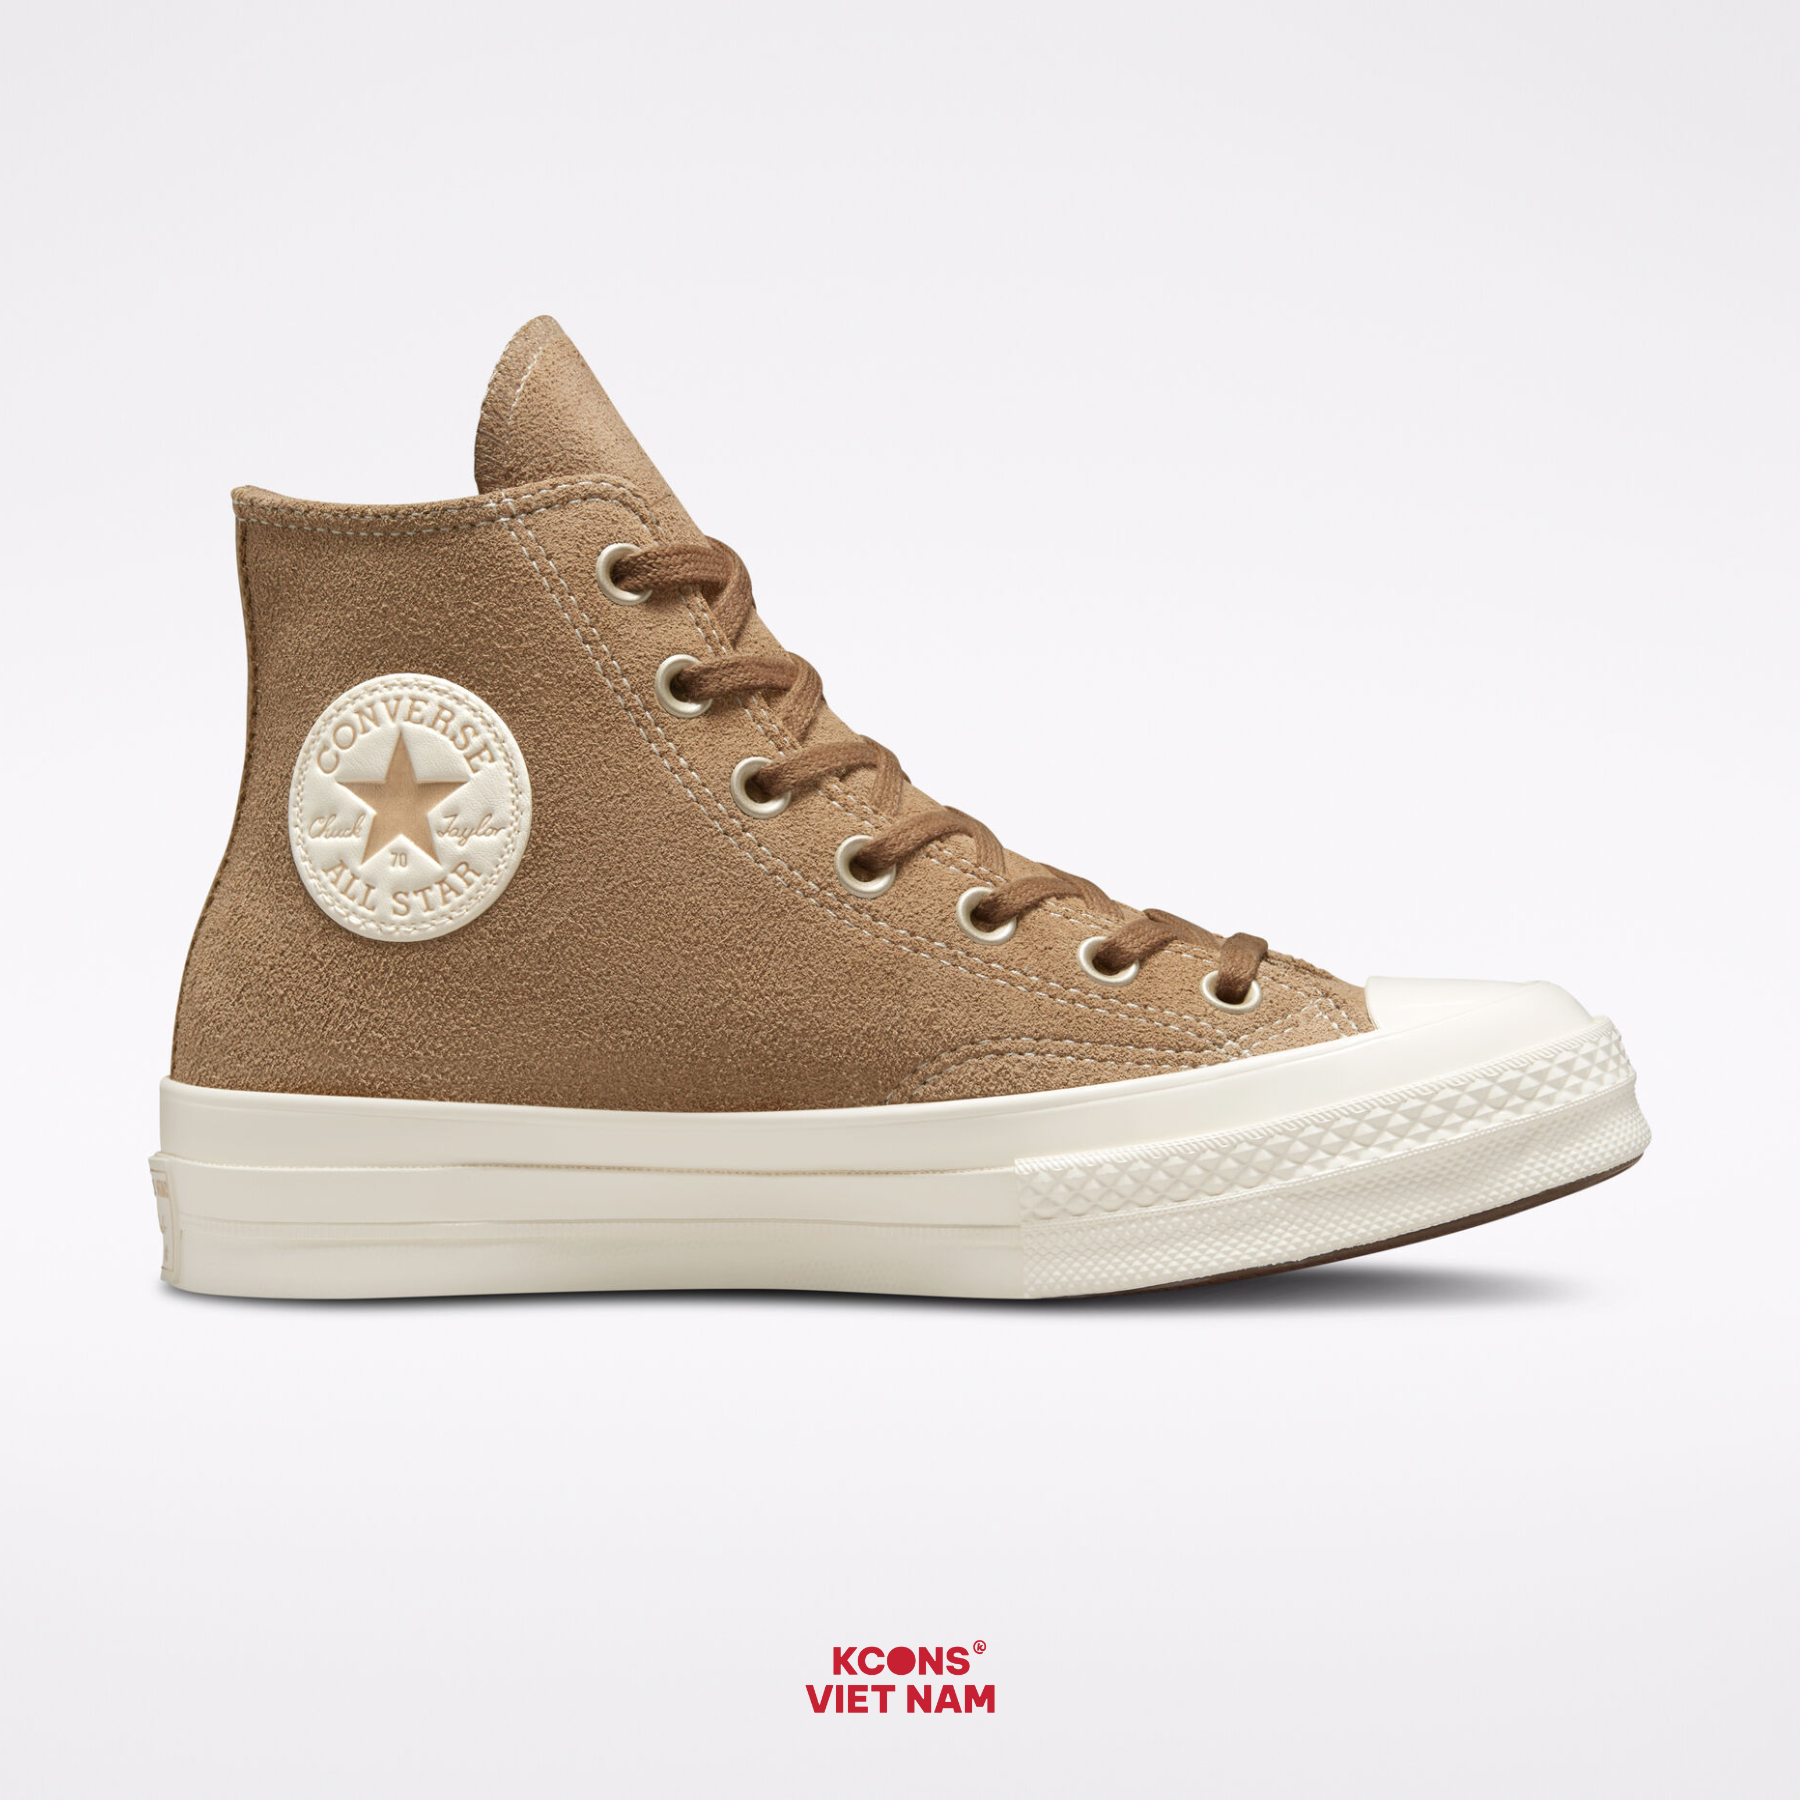  Giày Converse Chuck Taylor 1970 Suede Studs High Top A04273C 